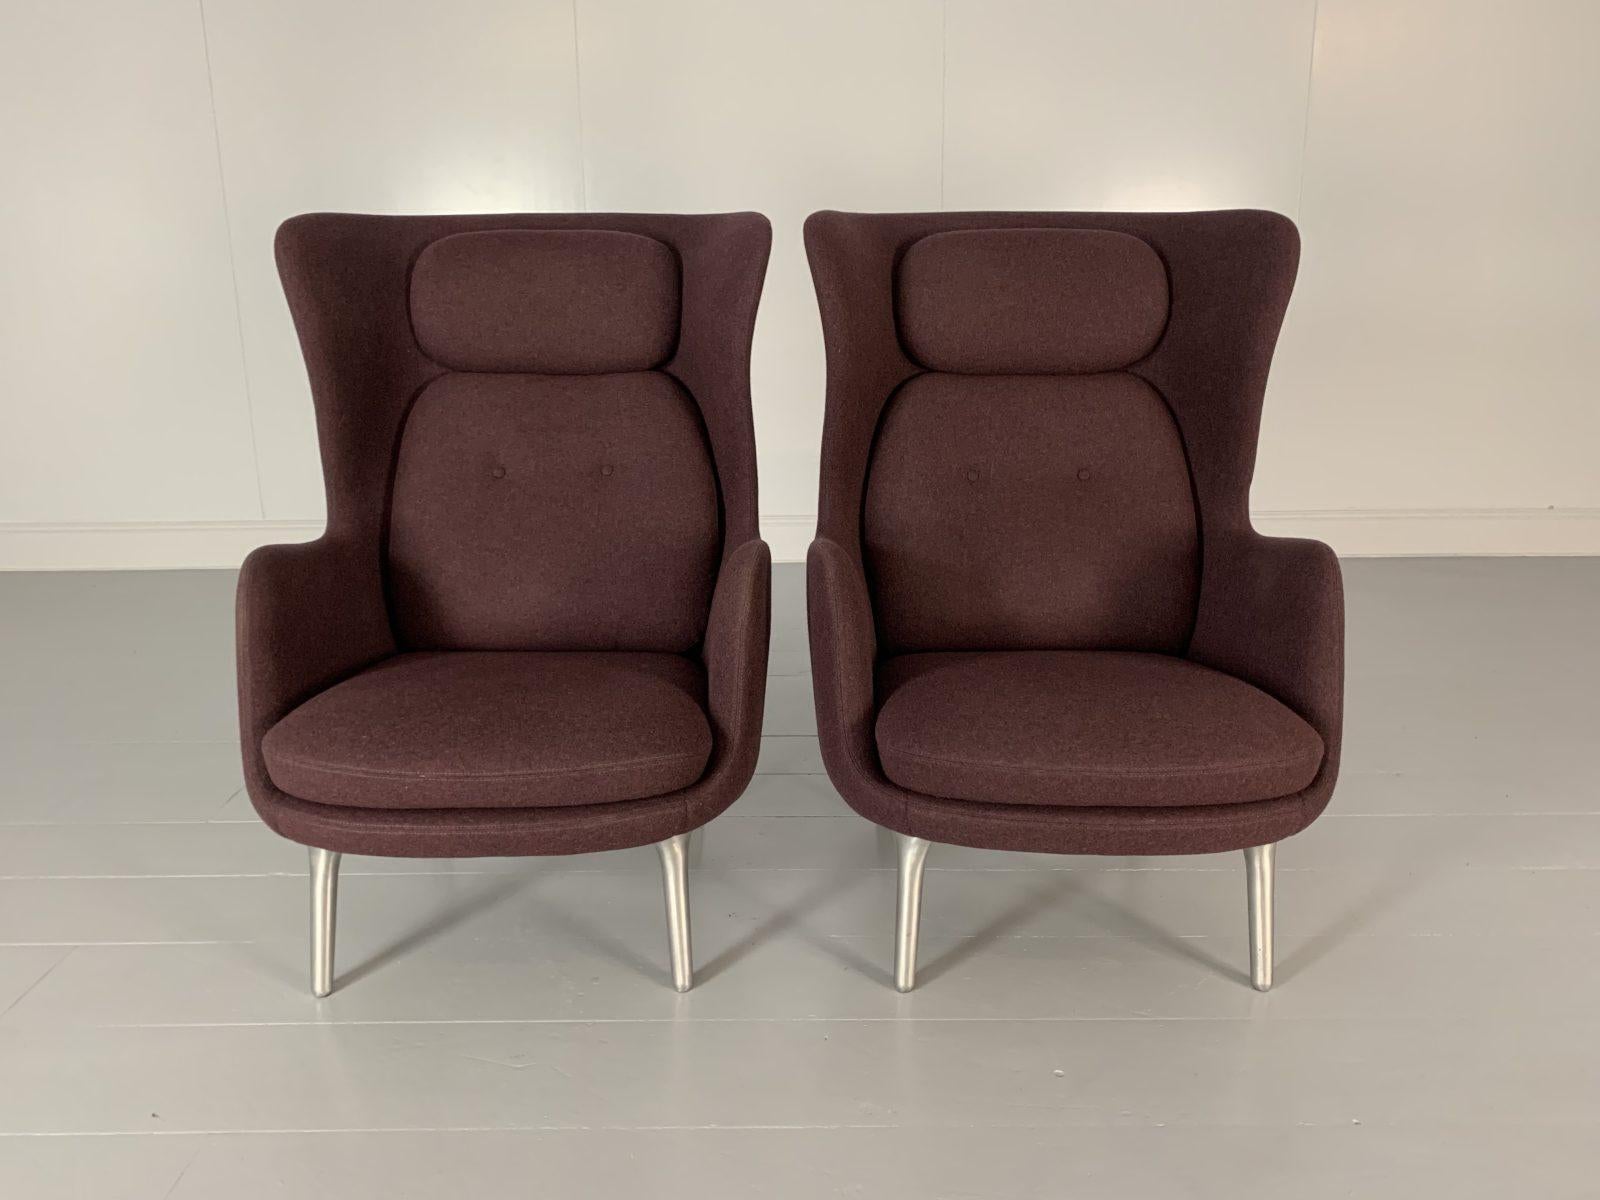 Hello Friends, and welcome to another unmissable offering from Lord Browns Furniture, the UK’s premier resource for fine Sofas and Chairs.

On offer on this occasion is a rare, identical pair of iconic “Ro JH1” armchairs with aluminium-base, from